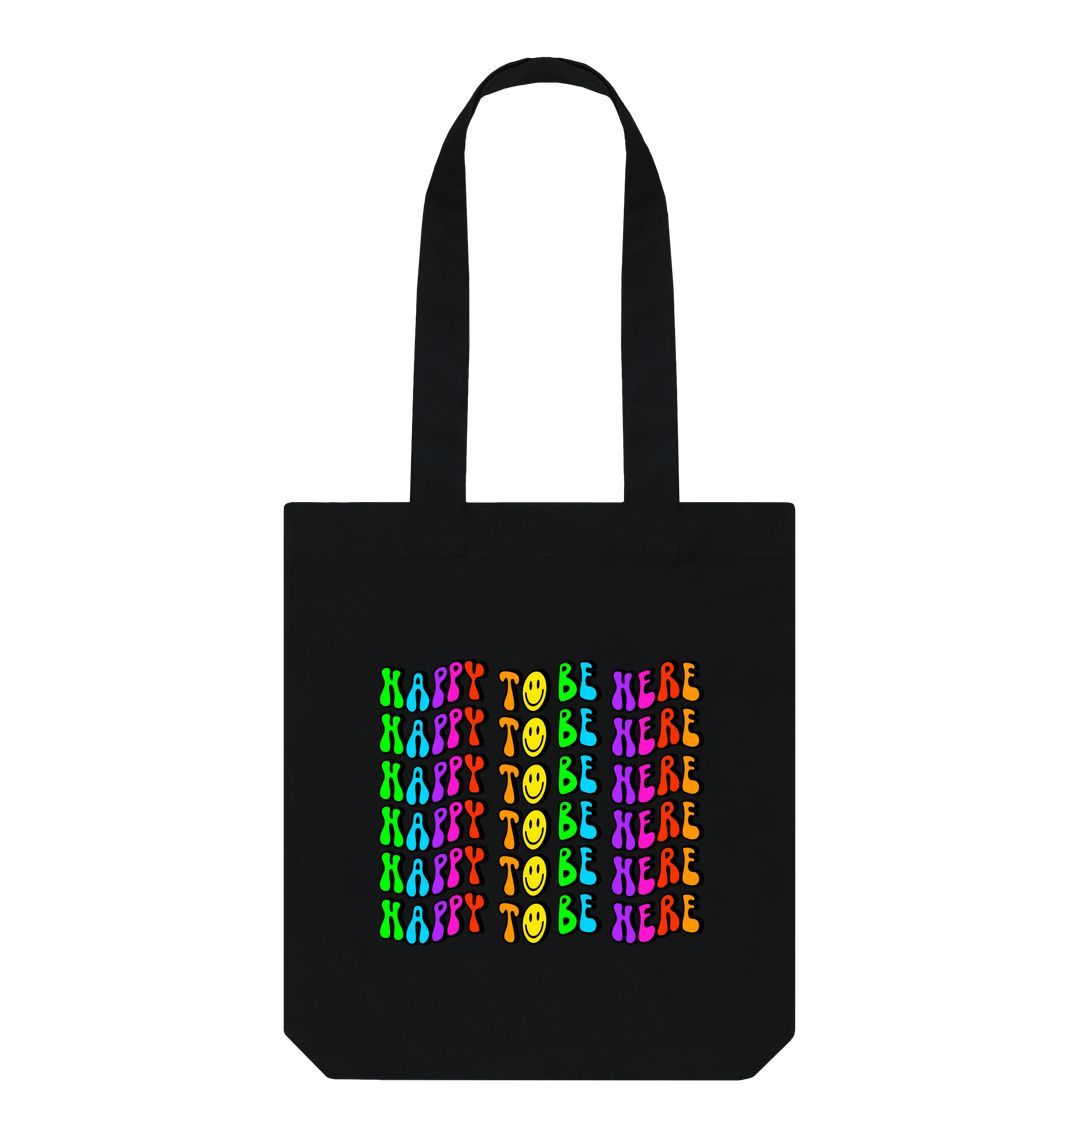 Black Happy to be here tote